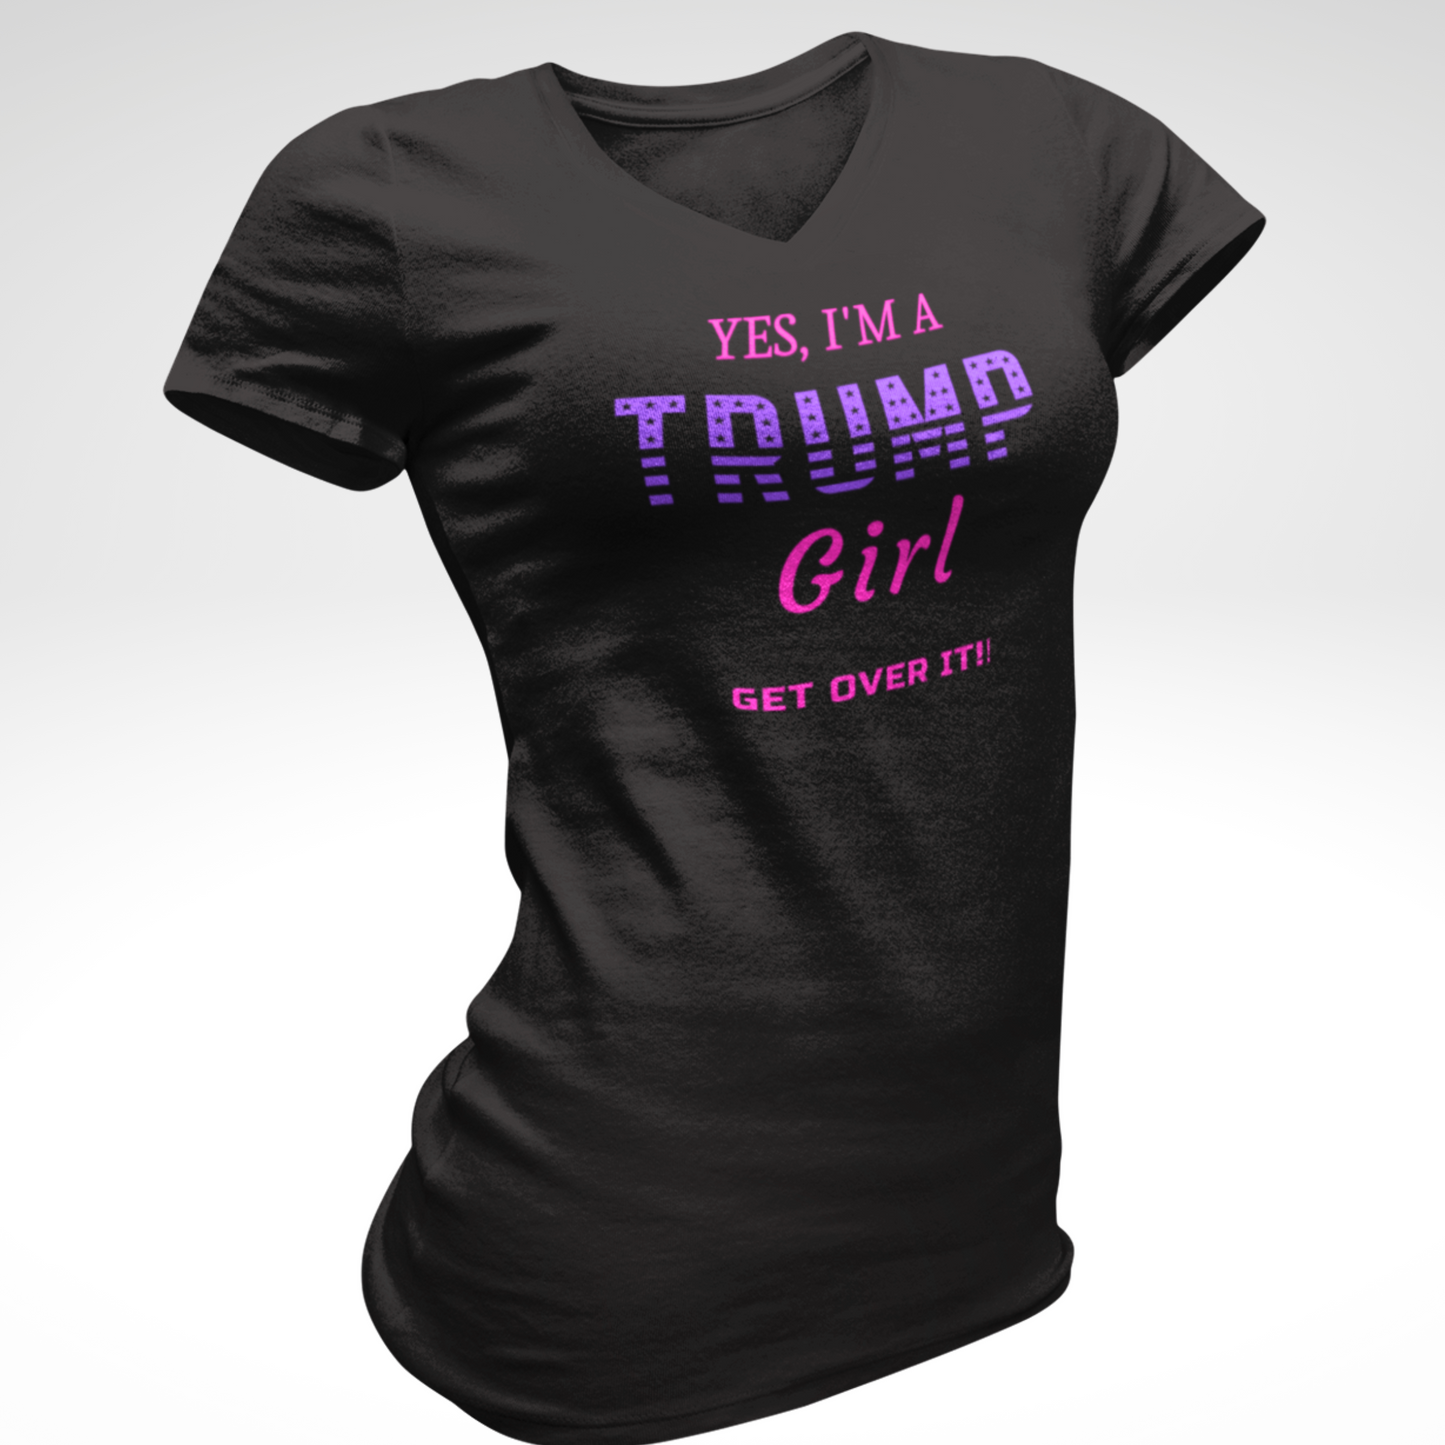 I'm a Trump Girl - The Right Side Prints